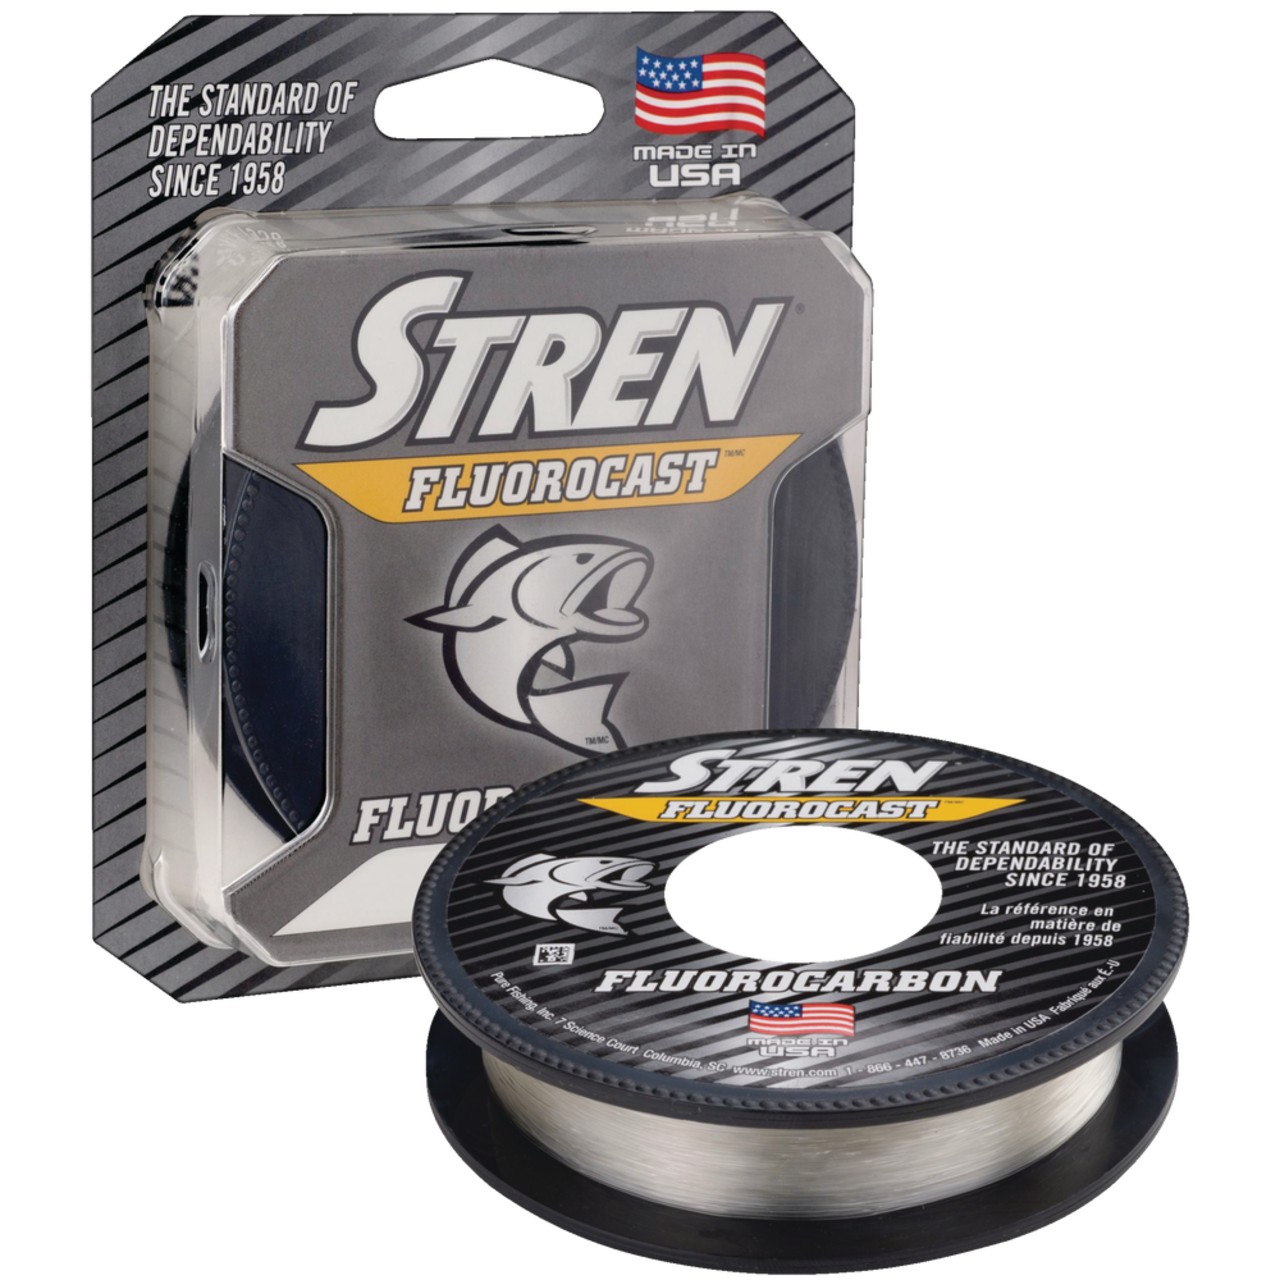 advance fluorocarbon 8lb clear - OutfitterSSM